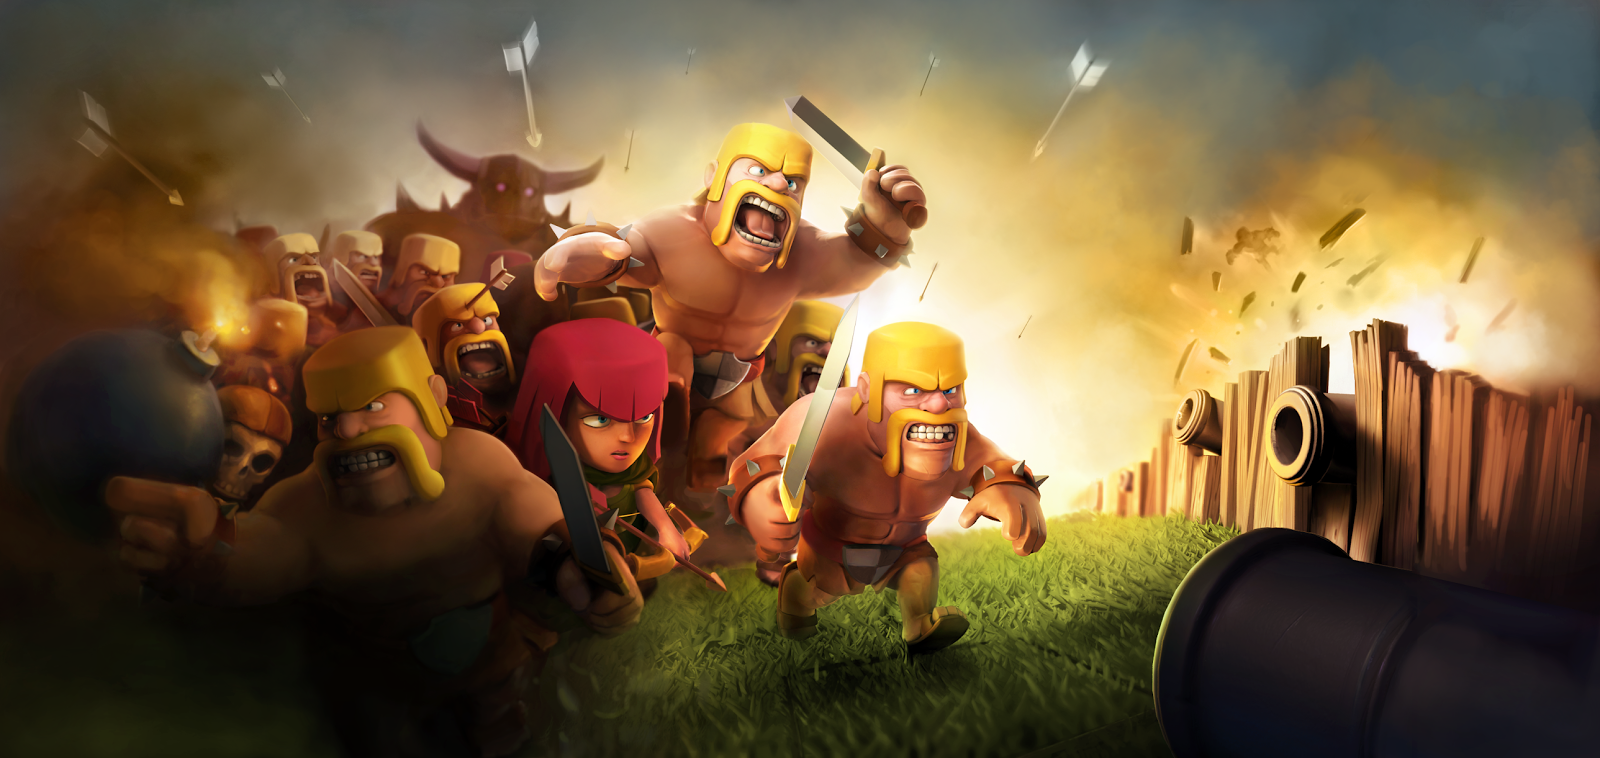 Clash Of Clans Hd Wallpapers